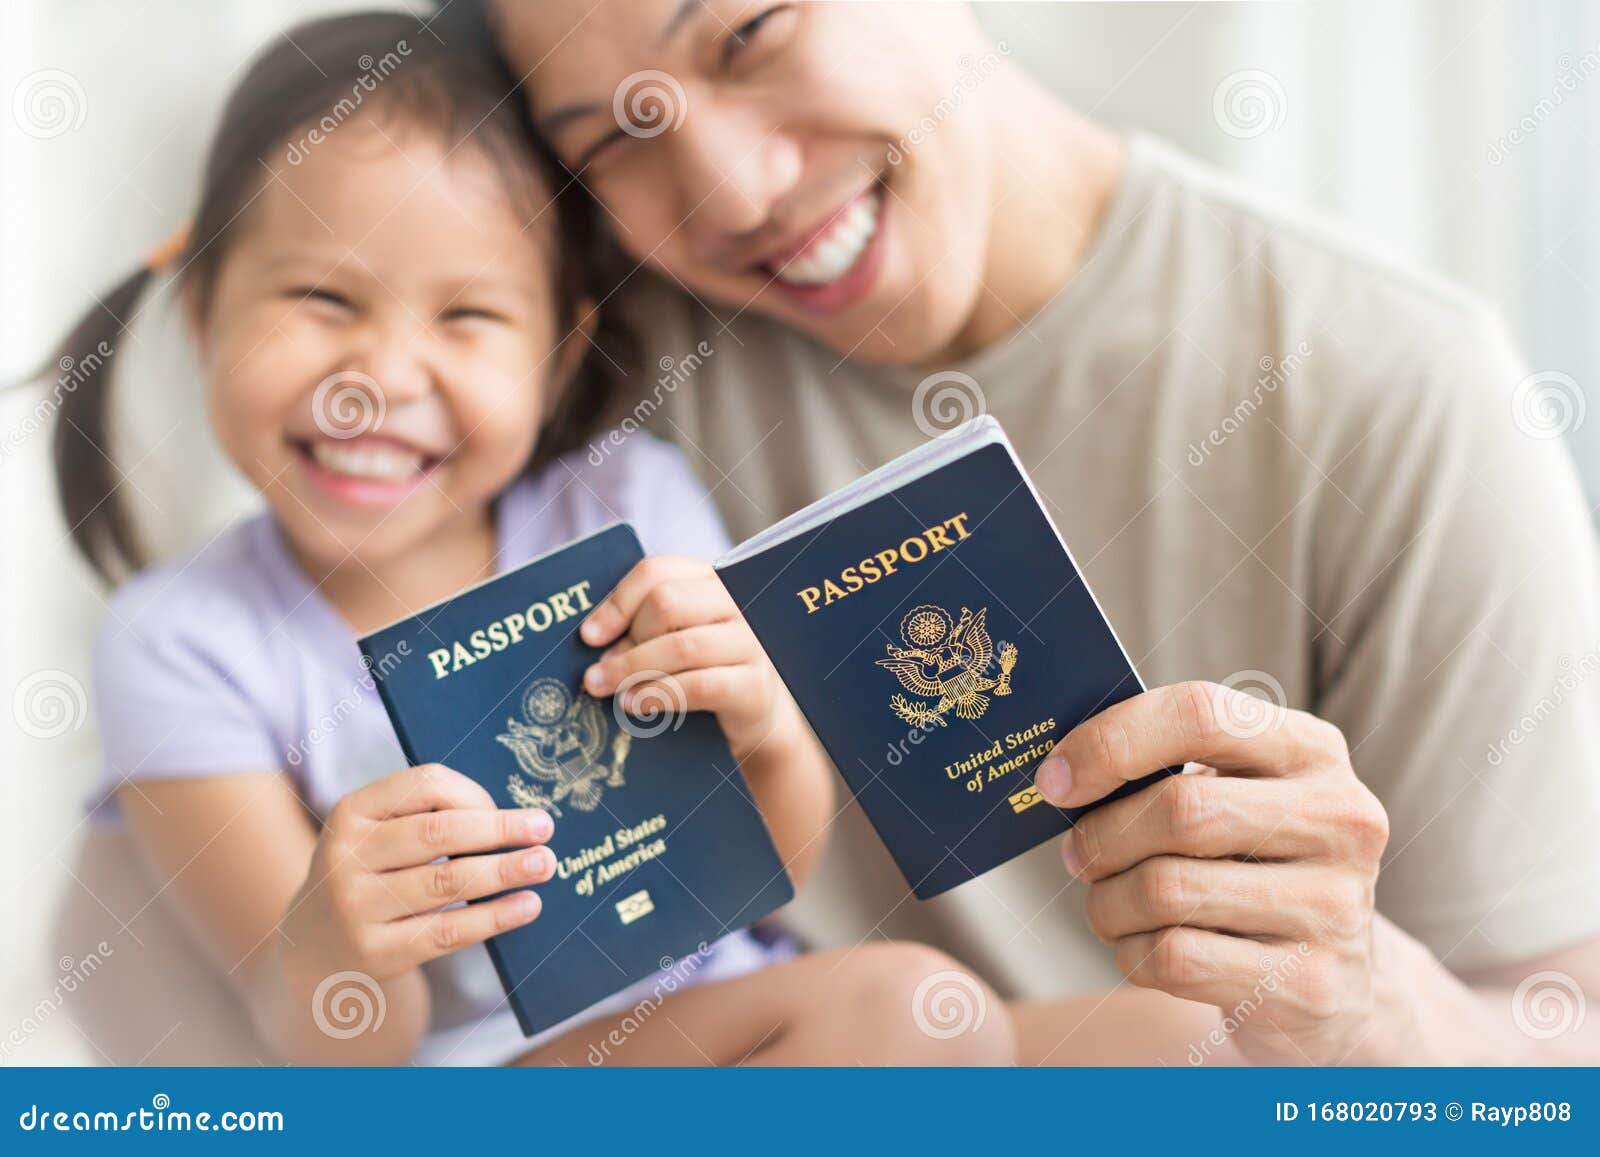 happy immigrant family becoming new american citizens, holding us passports